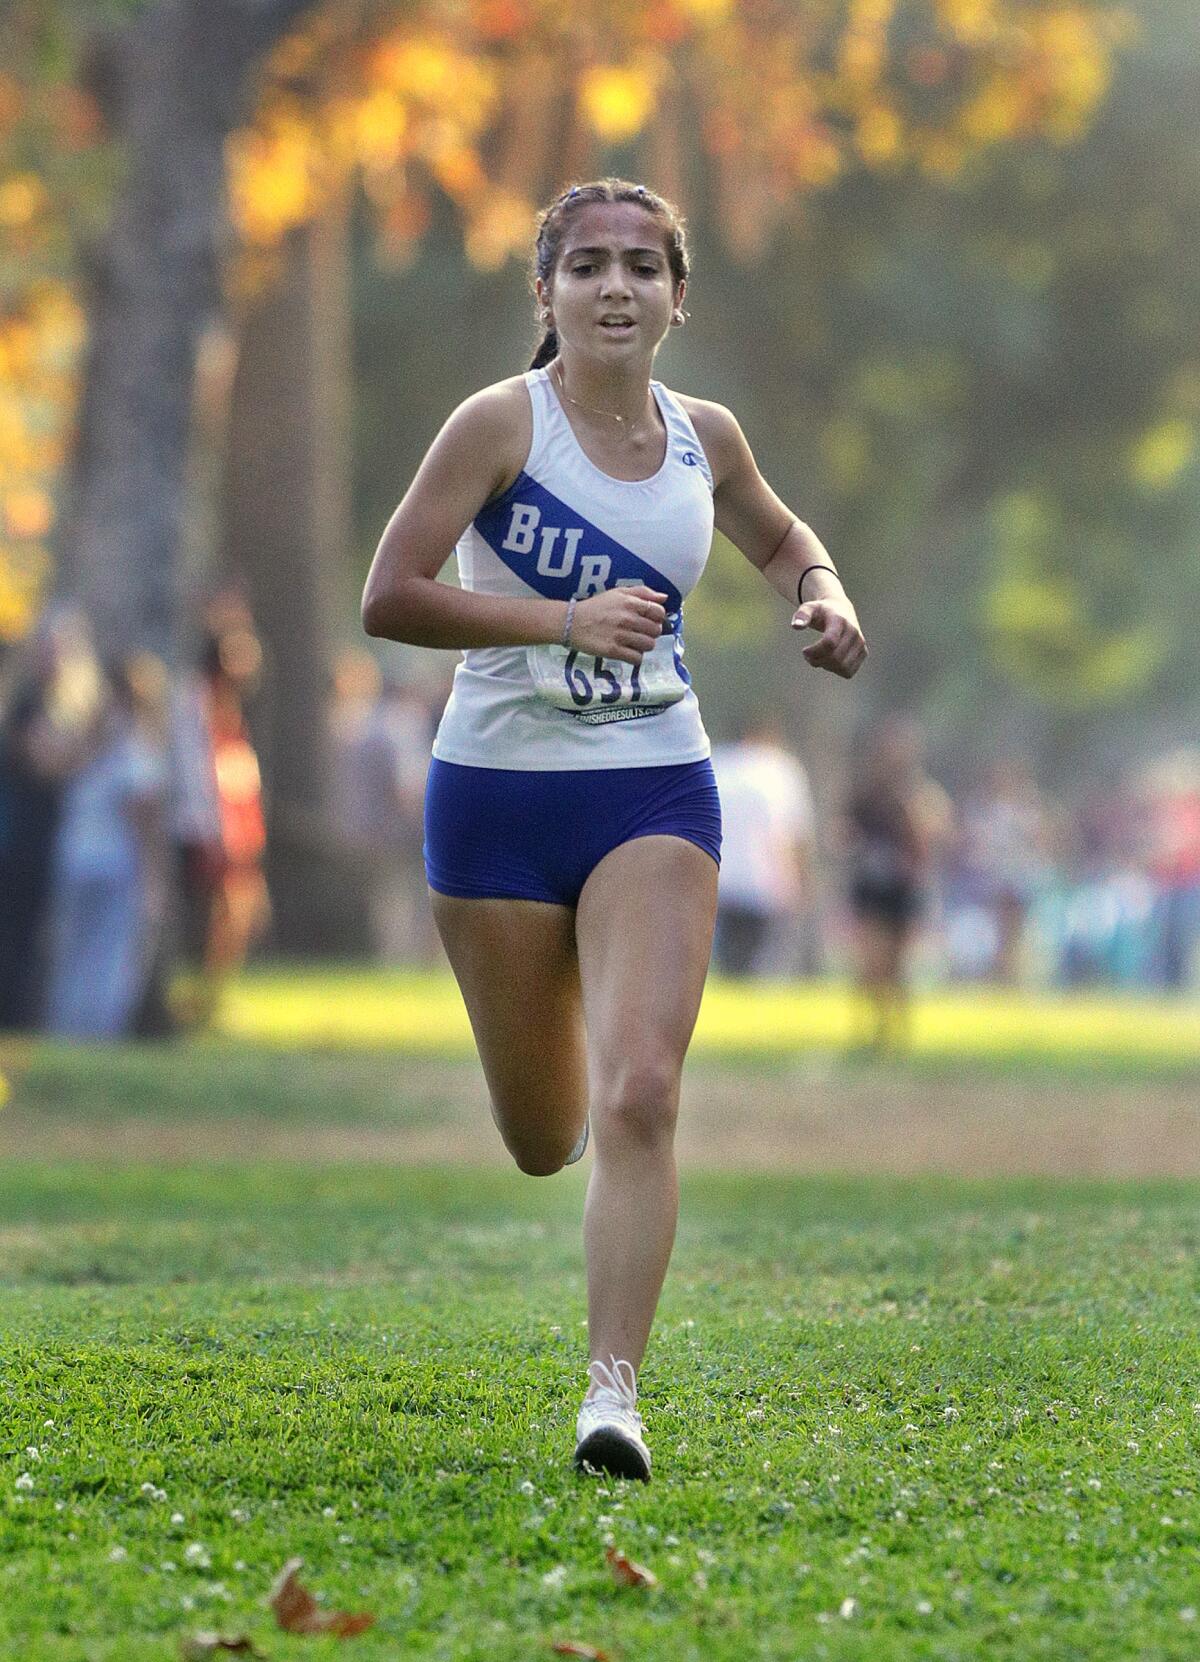 Burbank's Elin Markarian comes to the finish in fifth place in a Pacific League cross country meet at Arcadia Park in Arcadia on Thursday, November 7, 2019. This is the final league meet of the season.